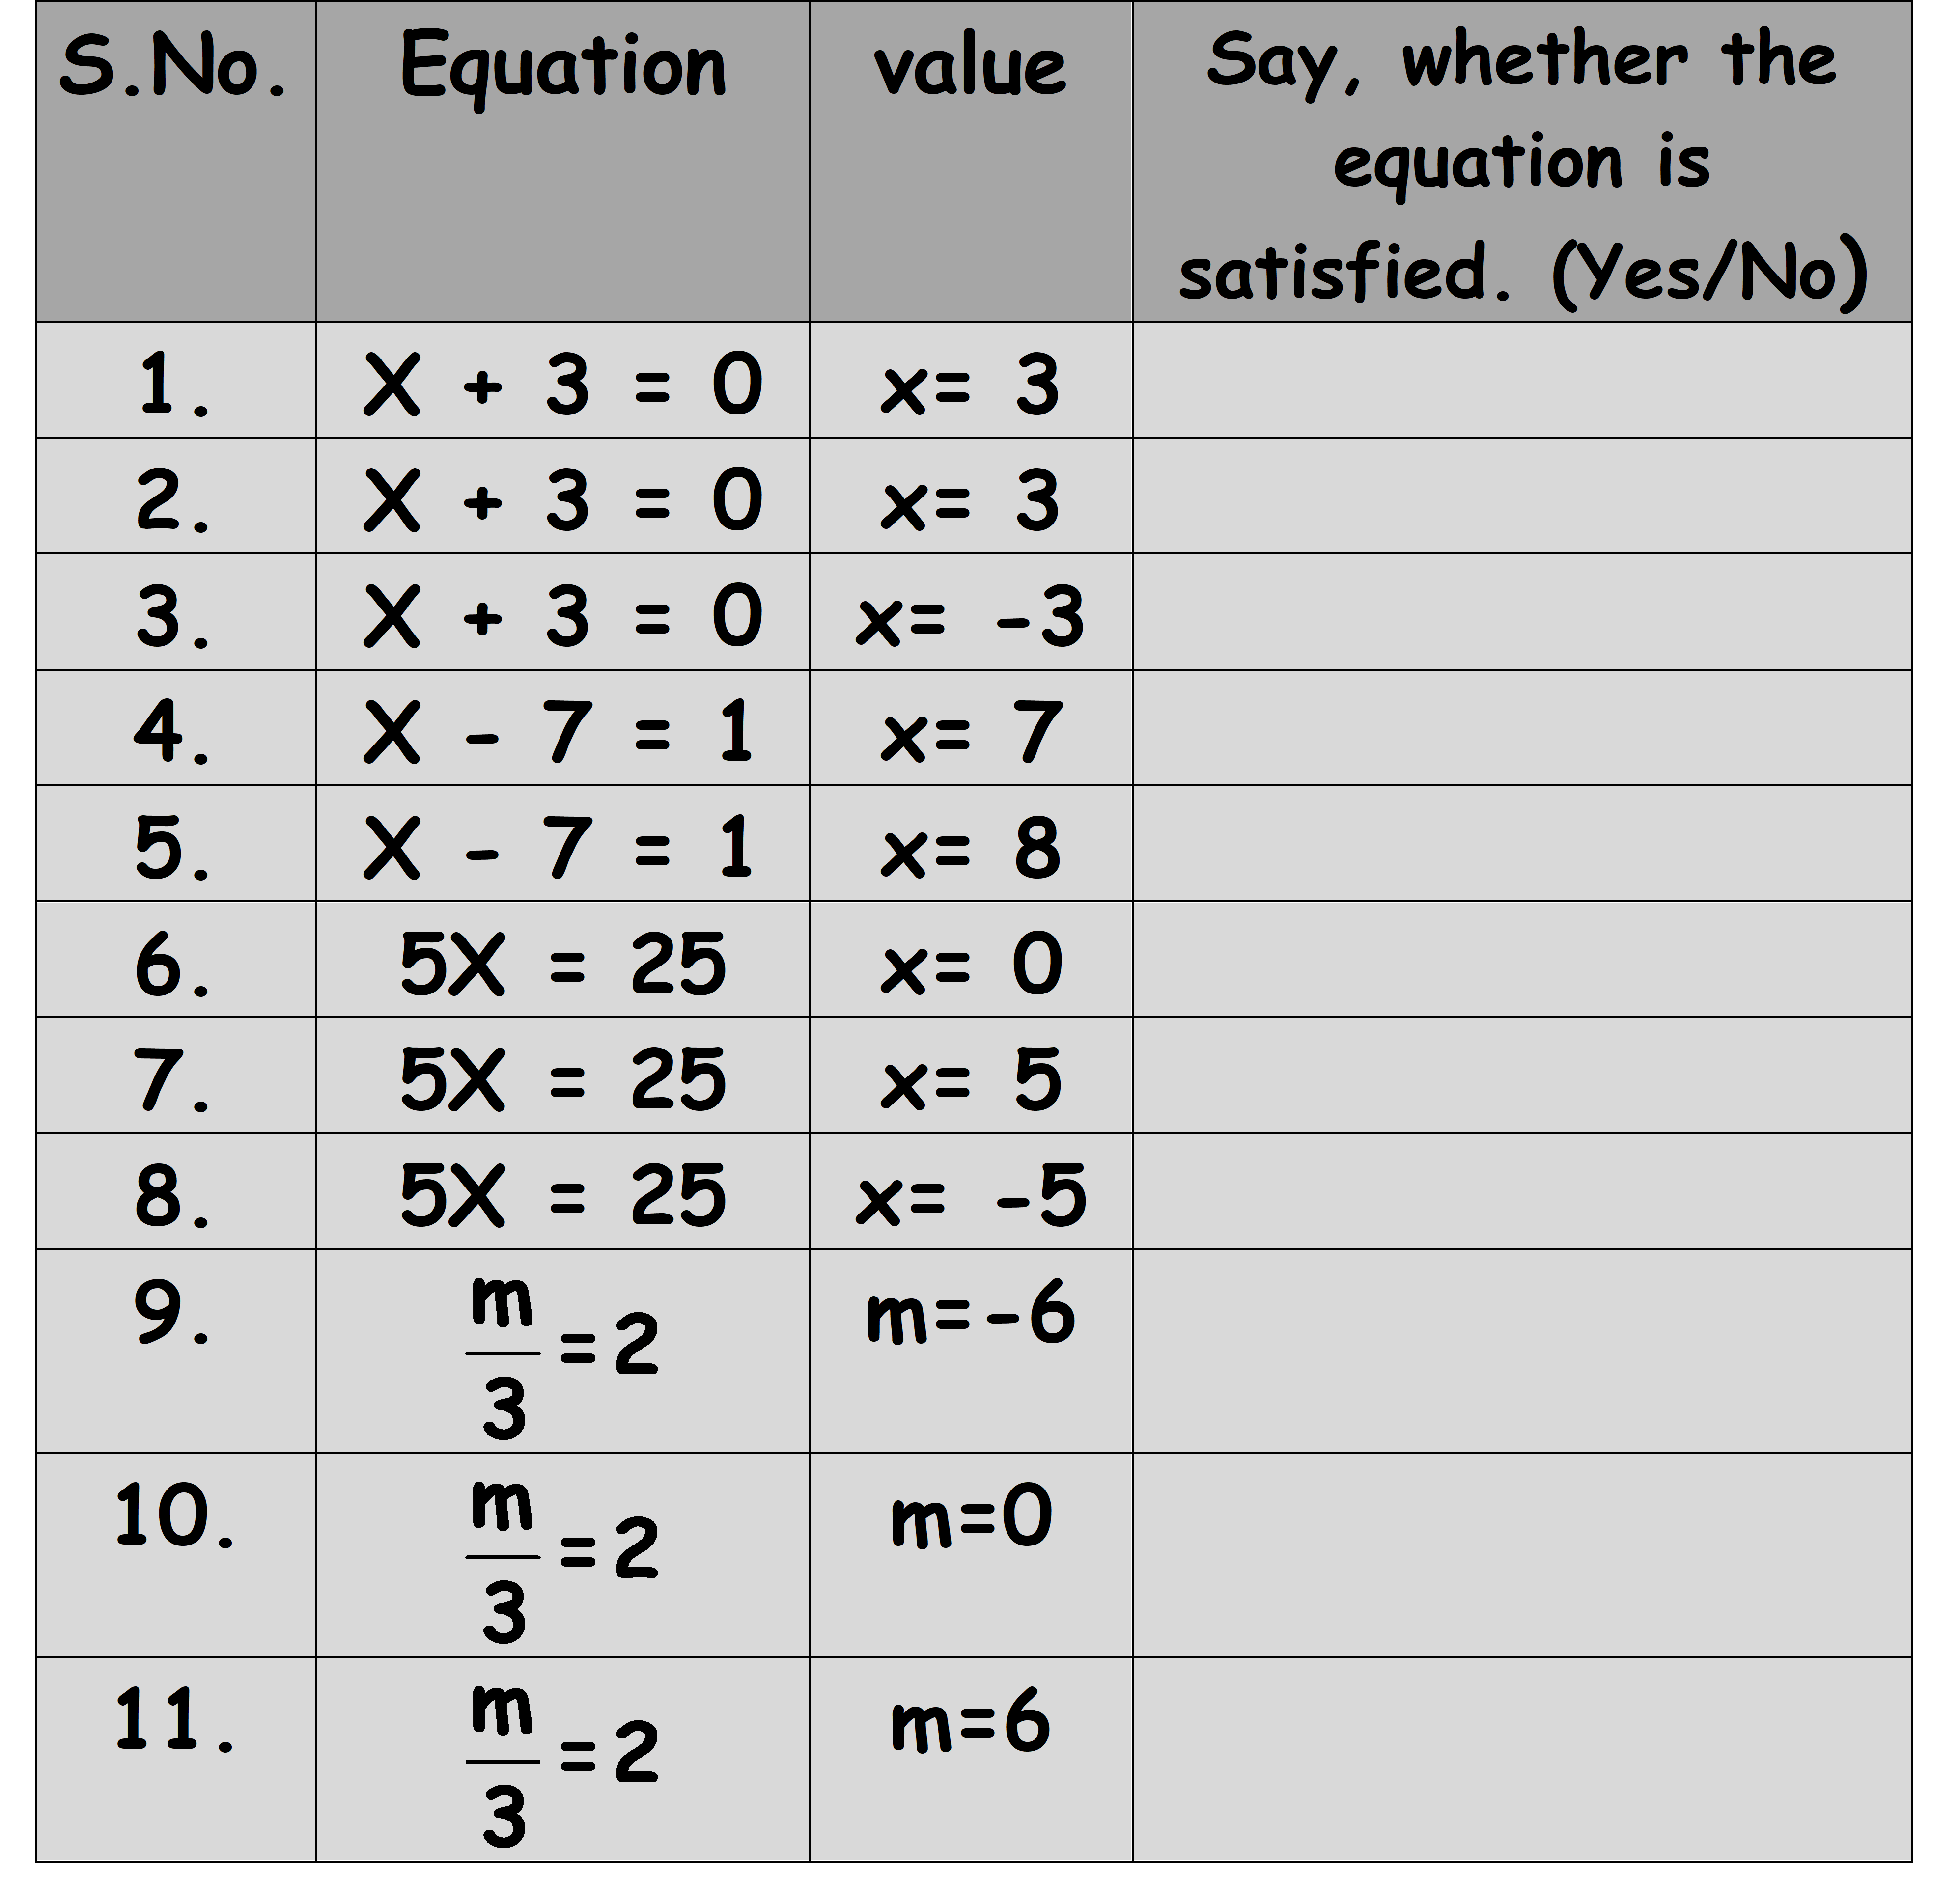 NCERT Solutions For Class 7 Maths Chapter 4, Simple Equations, Exercise 4.1 Q.1 table